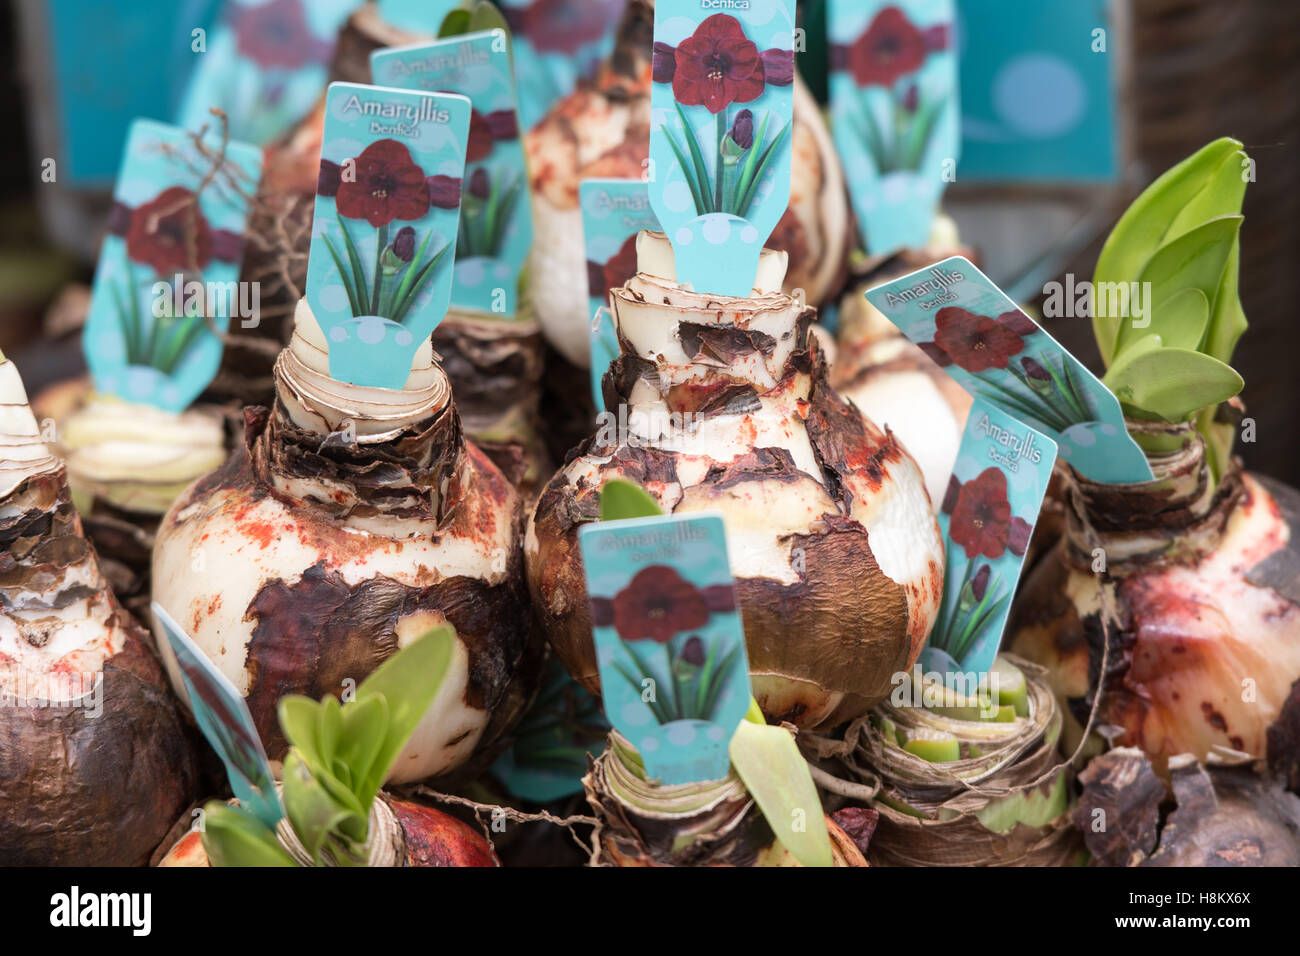 Amsterdam, Netherlands close up of red Amaryllis flower bulbs for sale in an outdoor market. Stock Photo